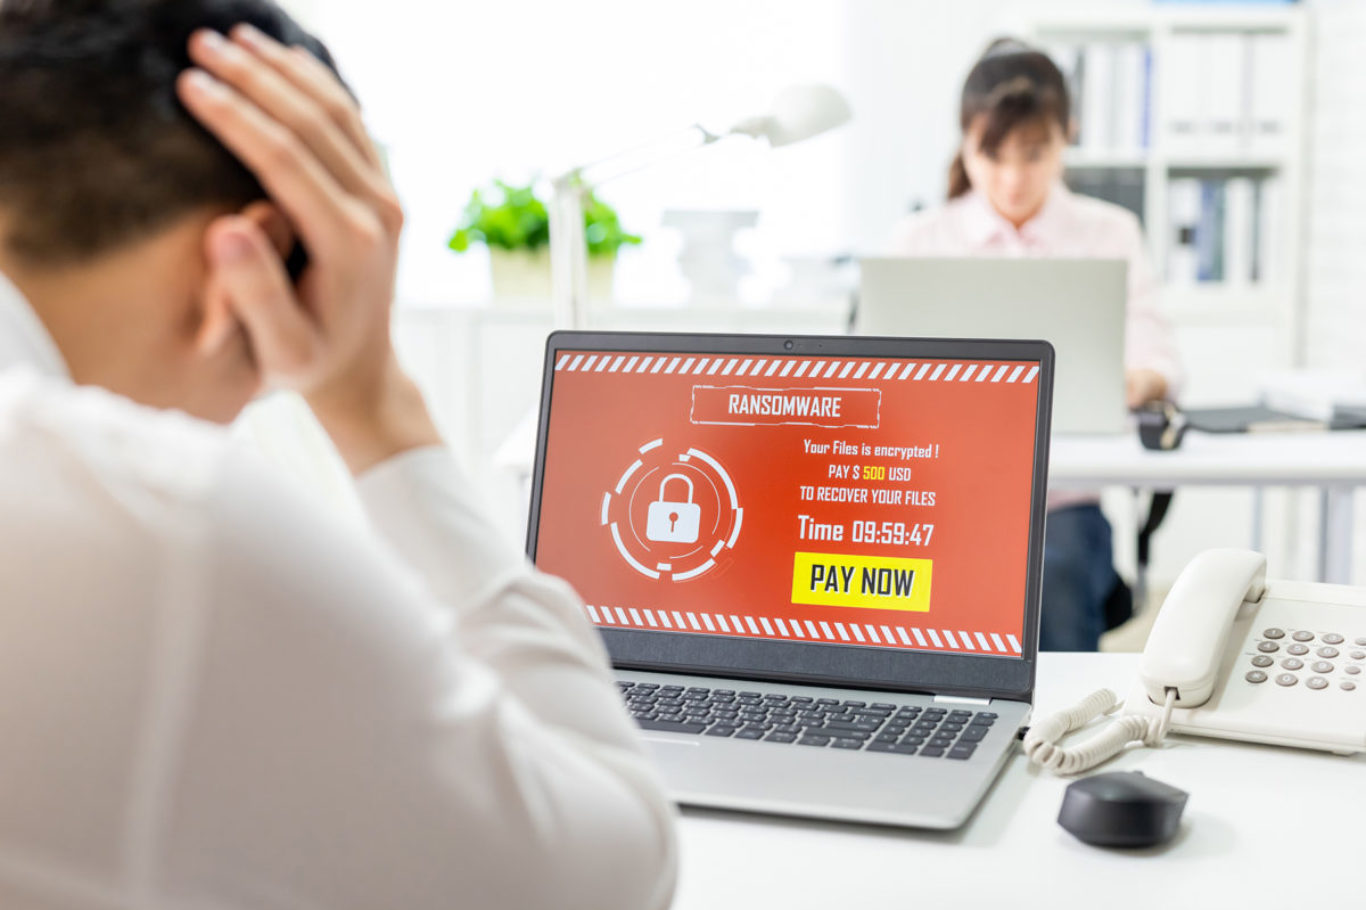 asian worried young businessman looking at laptop computer with ransomware attack words on the screen in office